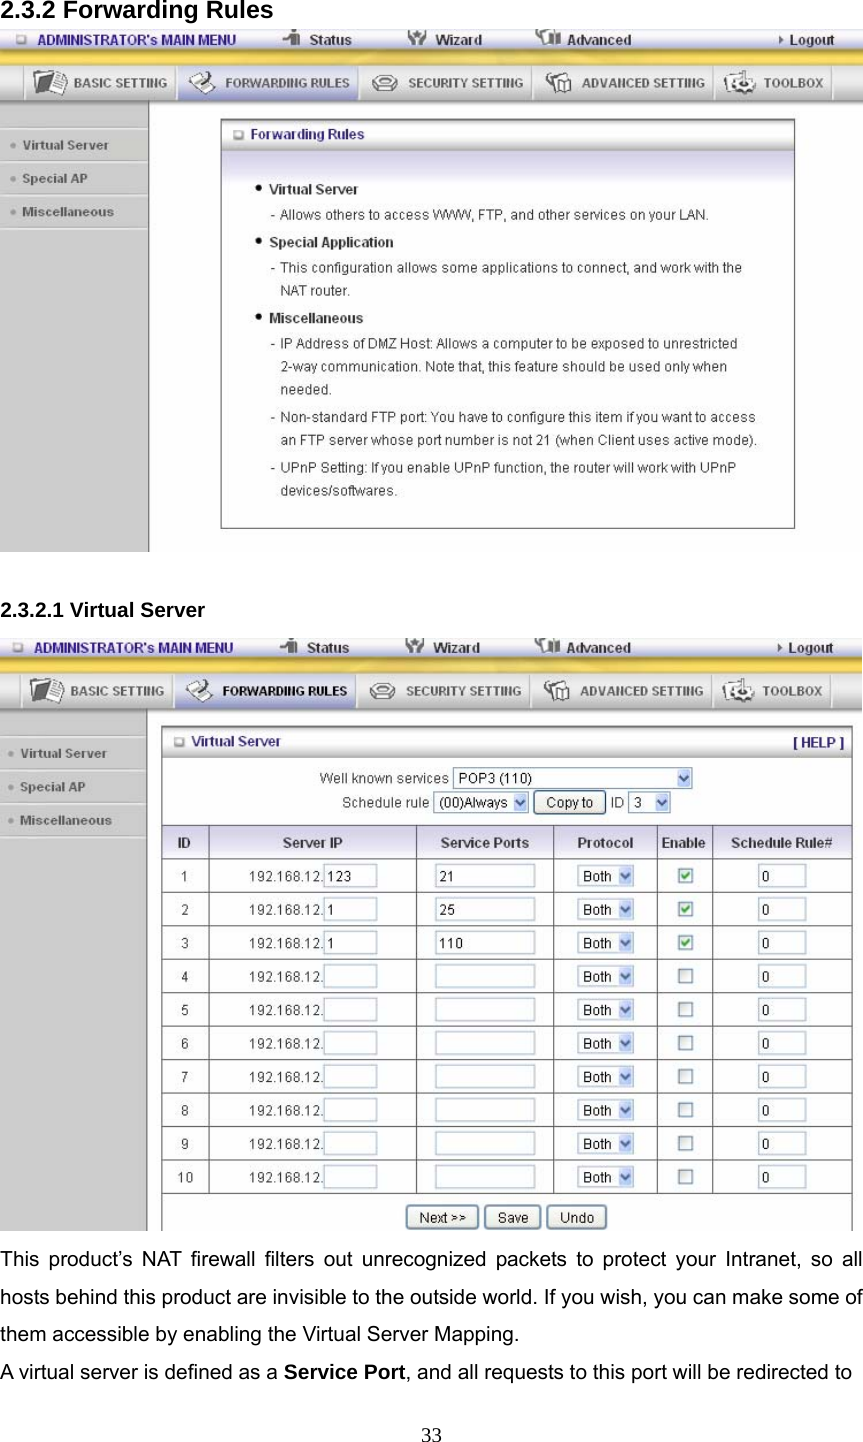  33 2.3.2 Forwarding Rules   2.3.2.1 Virtual Server  This product’s NAT firewall filters out unrecognized packets to protect your Intranet, so all hosts behind this product are invisible to the outside world. If you wish, you can make some of them accessible by enabling the Virtual Server Mapping. A virtual server is defined as a Service Port, and all requests to this port will be redirected to 